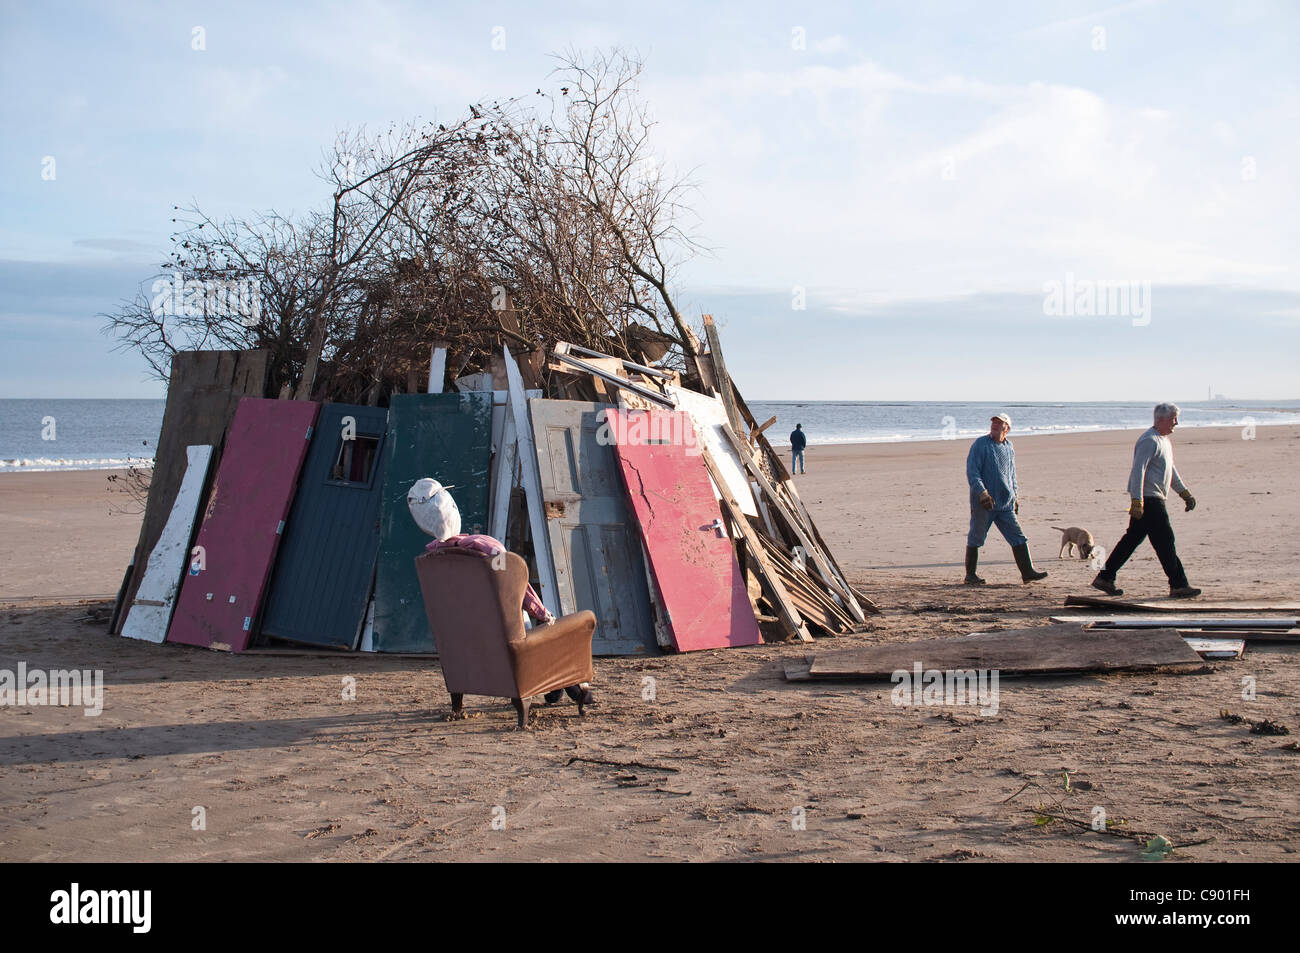 Building a large bonfire on the beach near Low Hauxley in Northumberland, UK, on November 5th to celebrate Guy Fawkes Night. Stock Photo